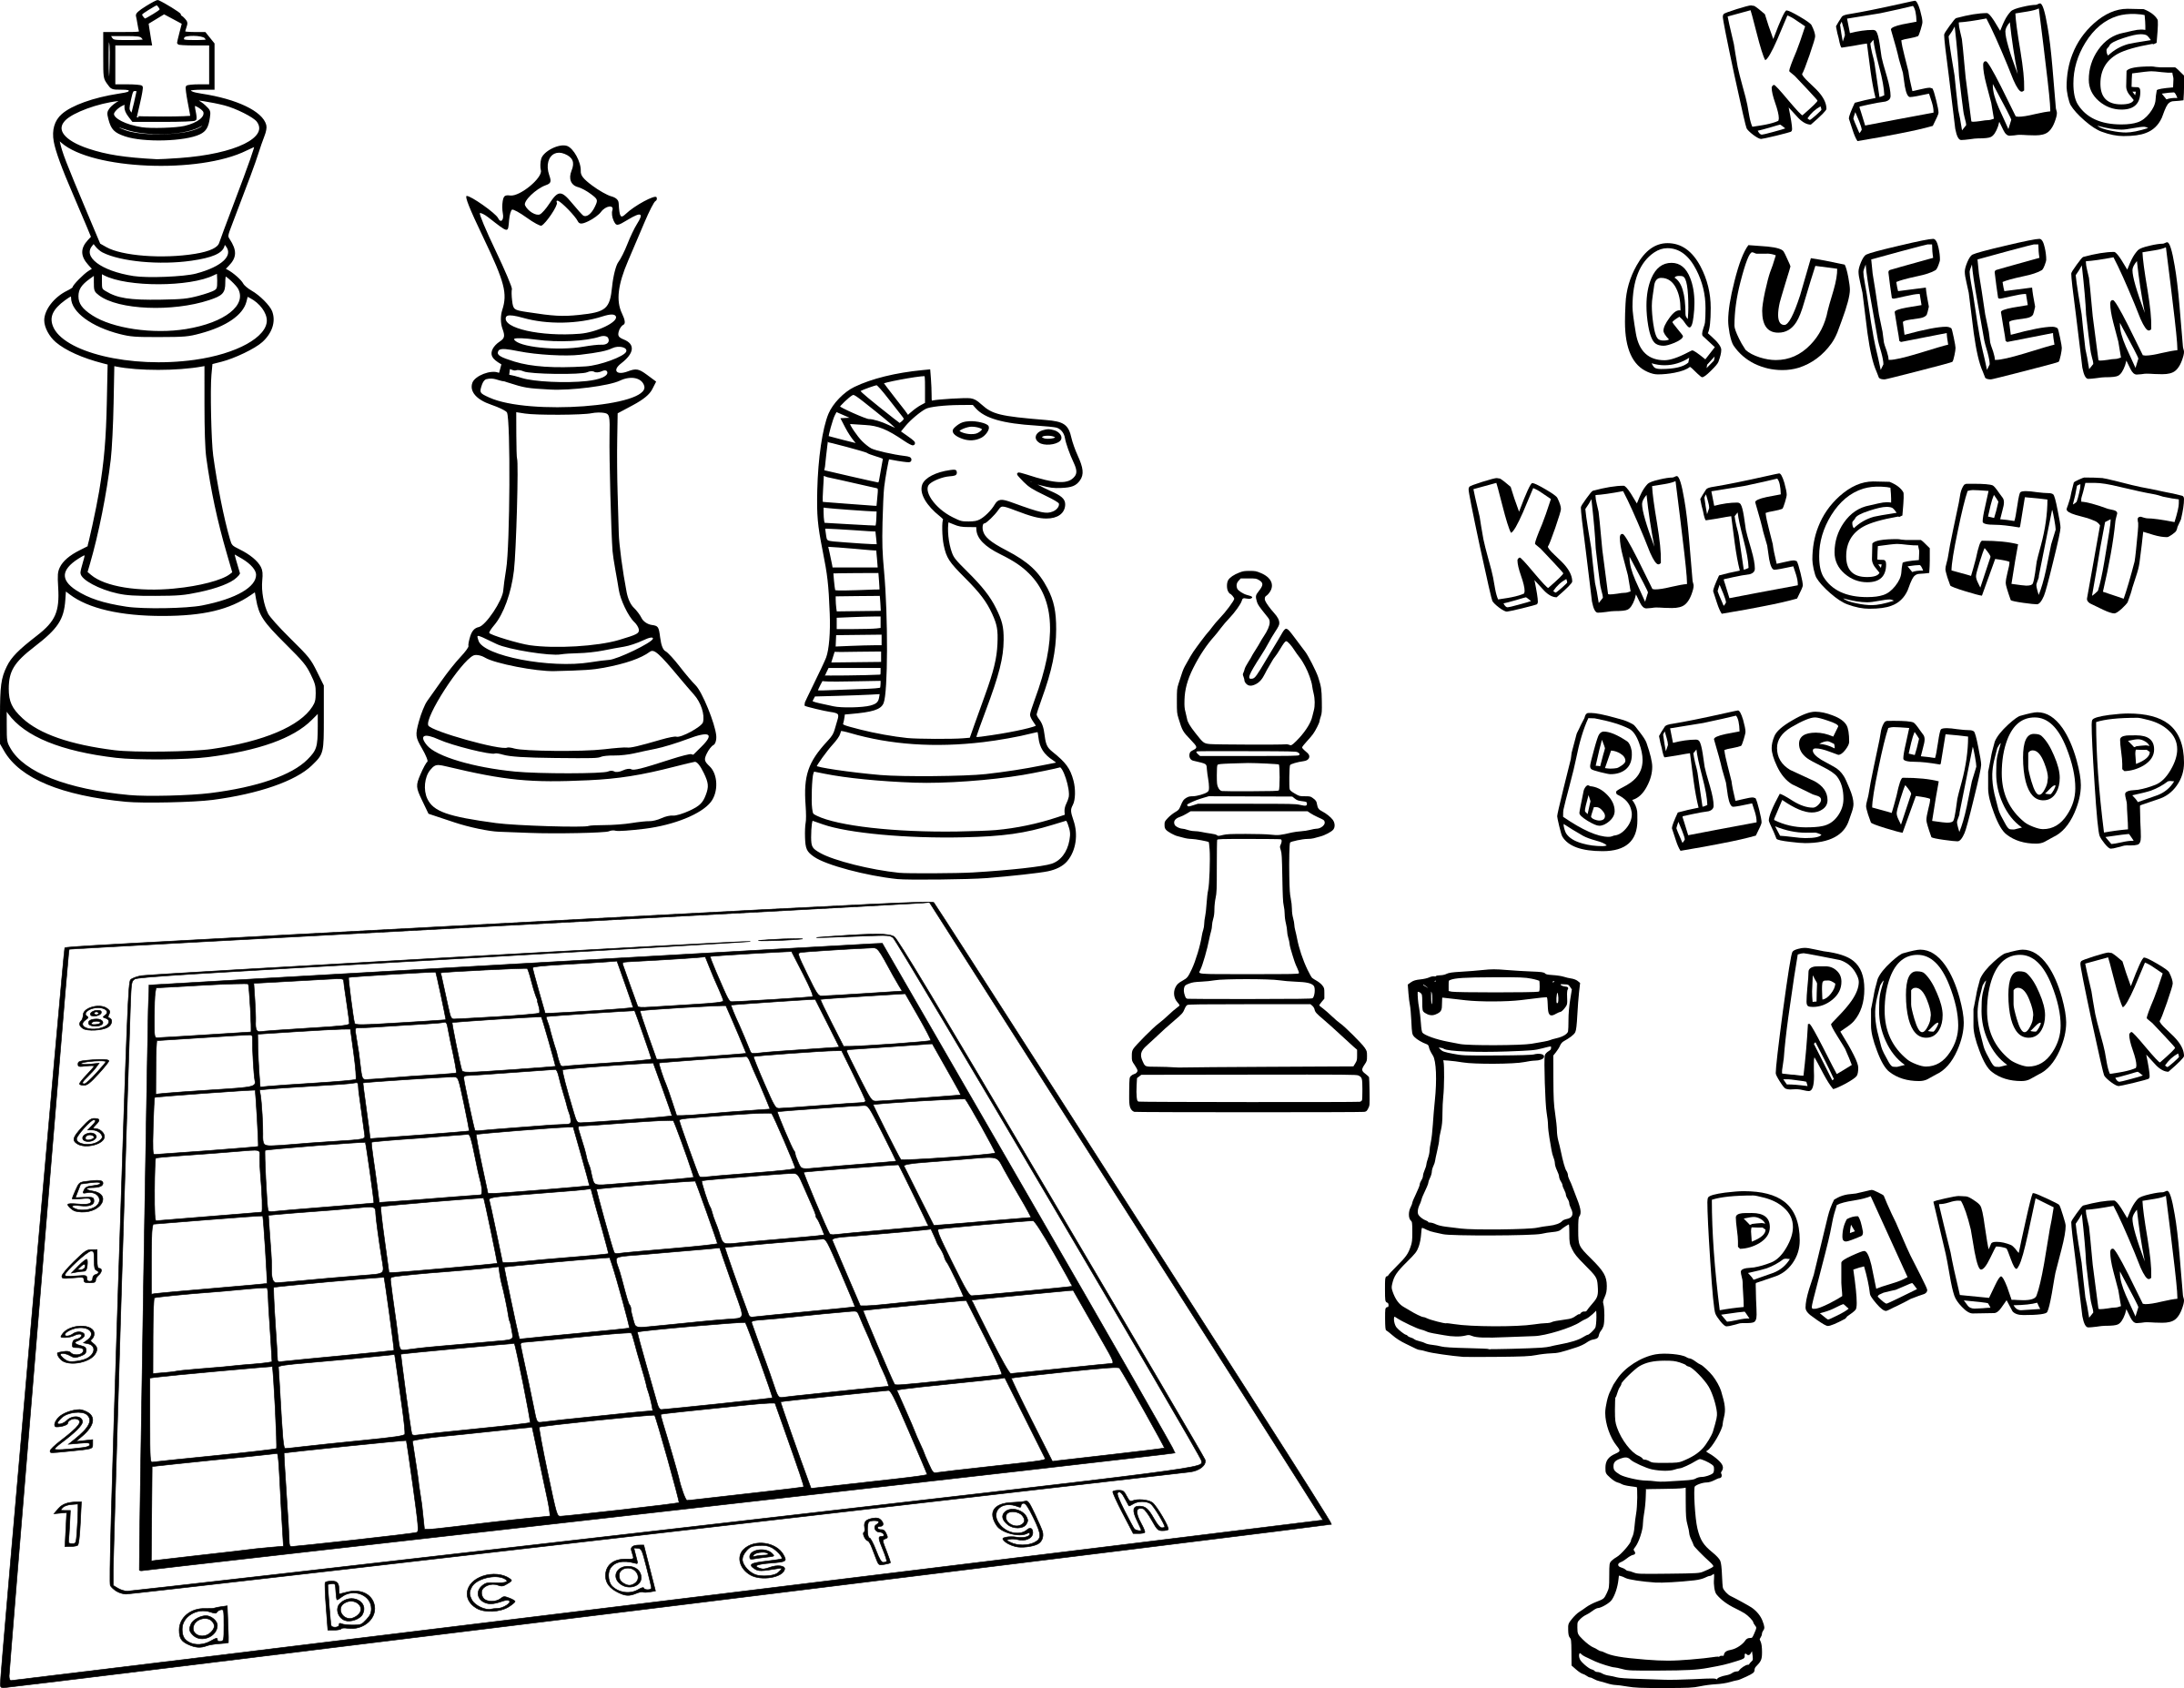 chess pieces coloring pages